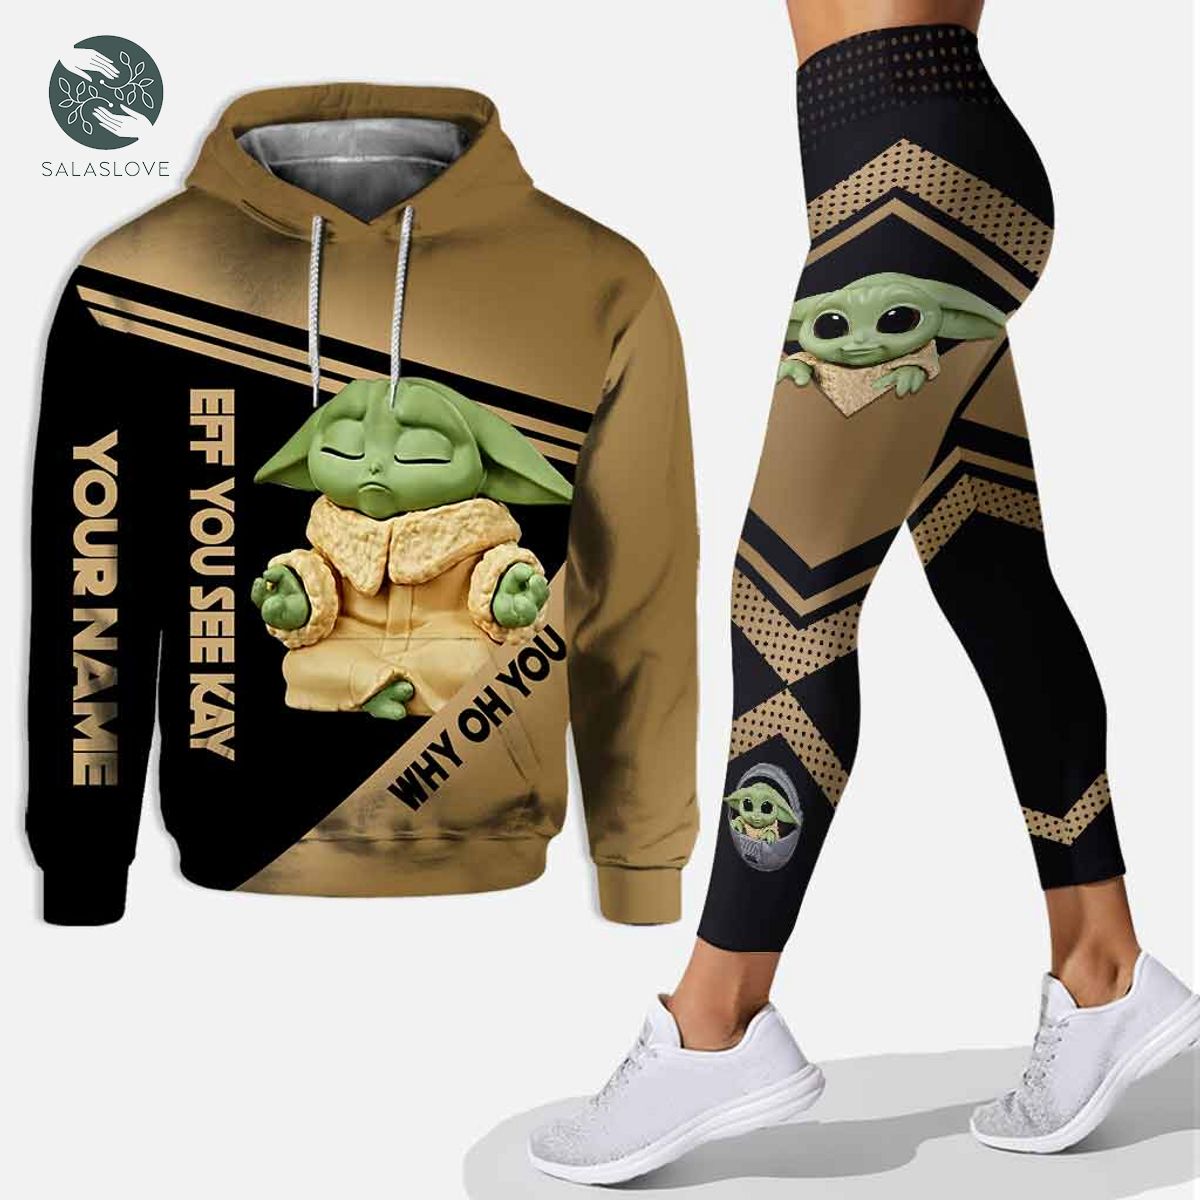 Personalized baby yoda hoodie leggings star wars outfit